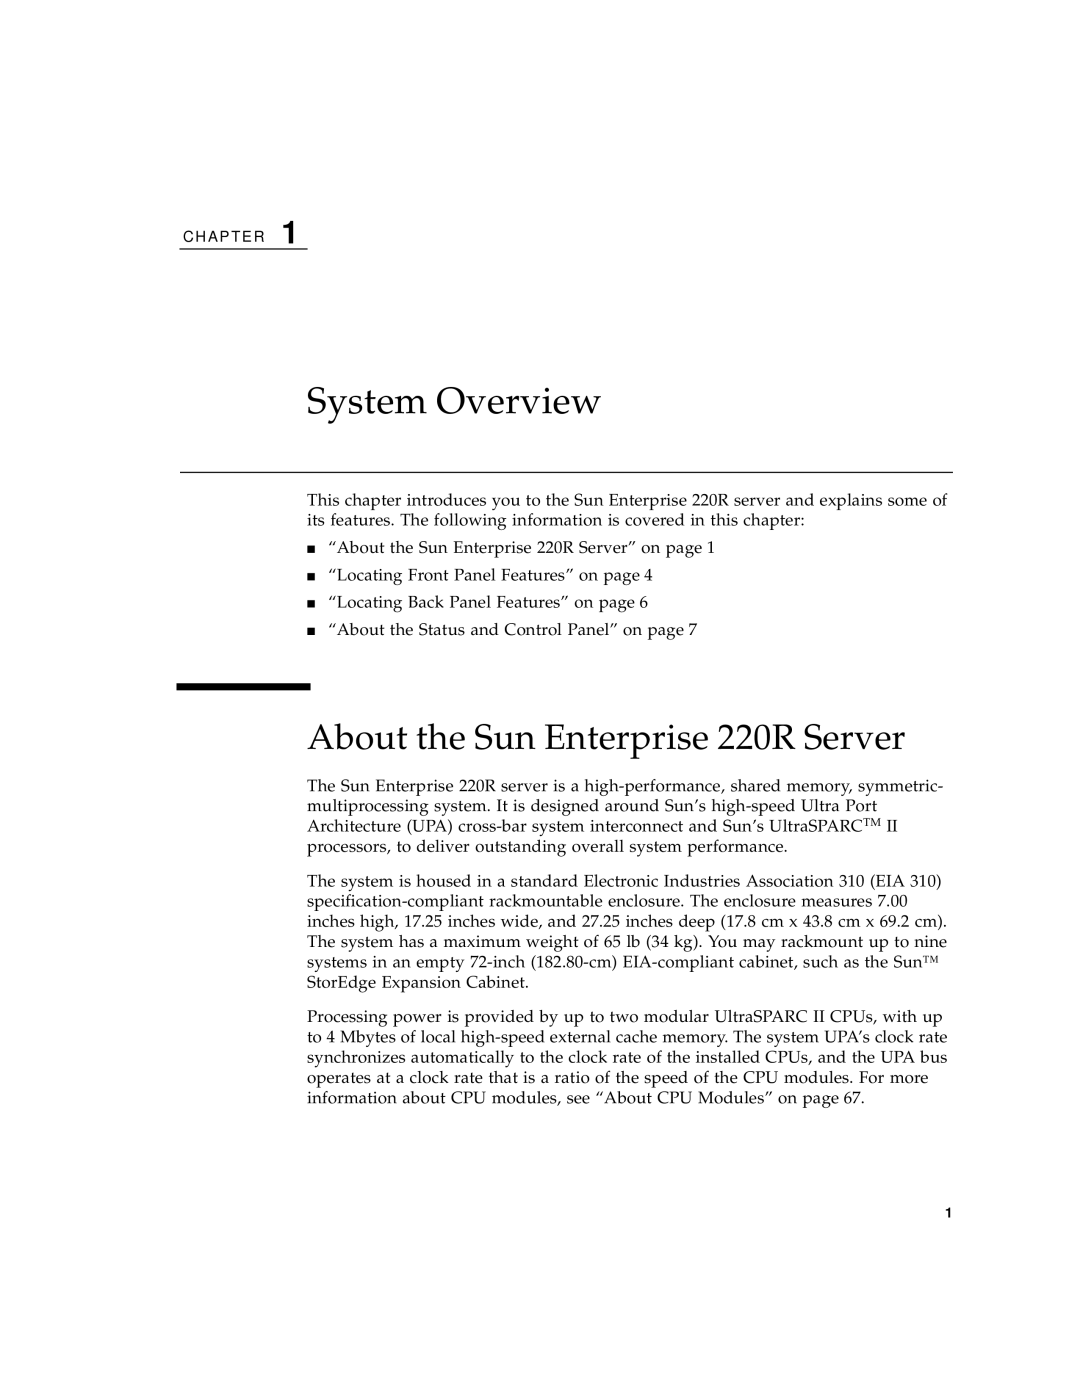 Sun Microsystems manual System Overview, About the Sun Enterprise 220R Server 